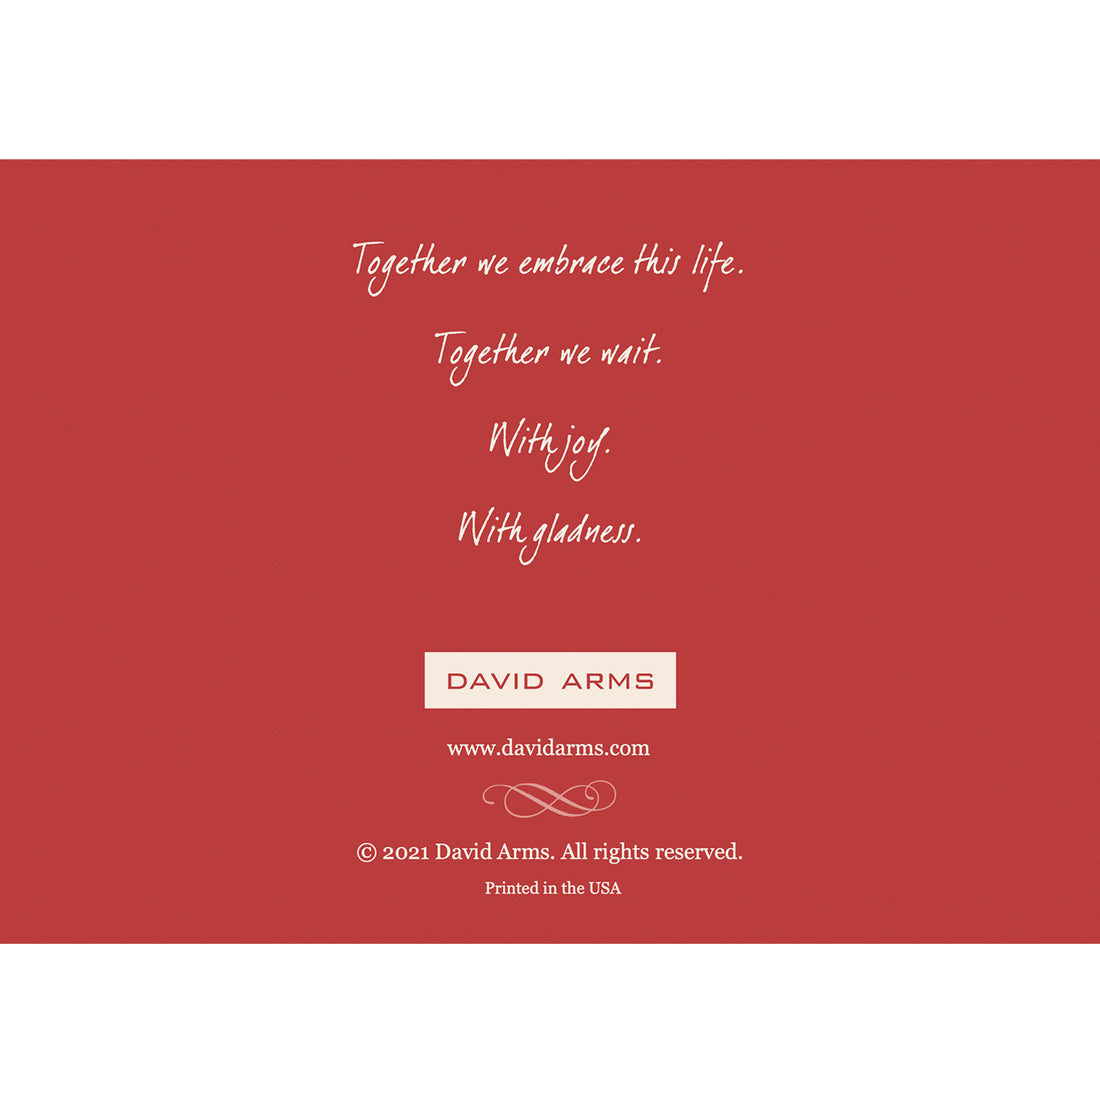 The red back side of the greeting card, featuring a quote from artist David Arms.